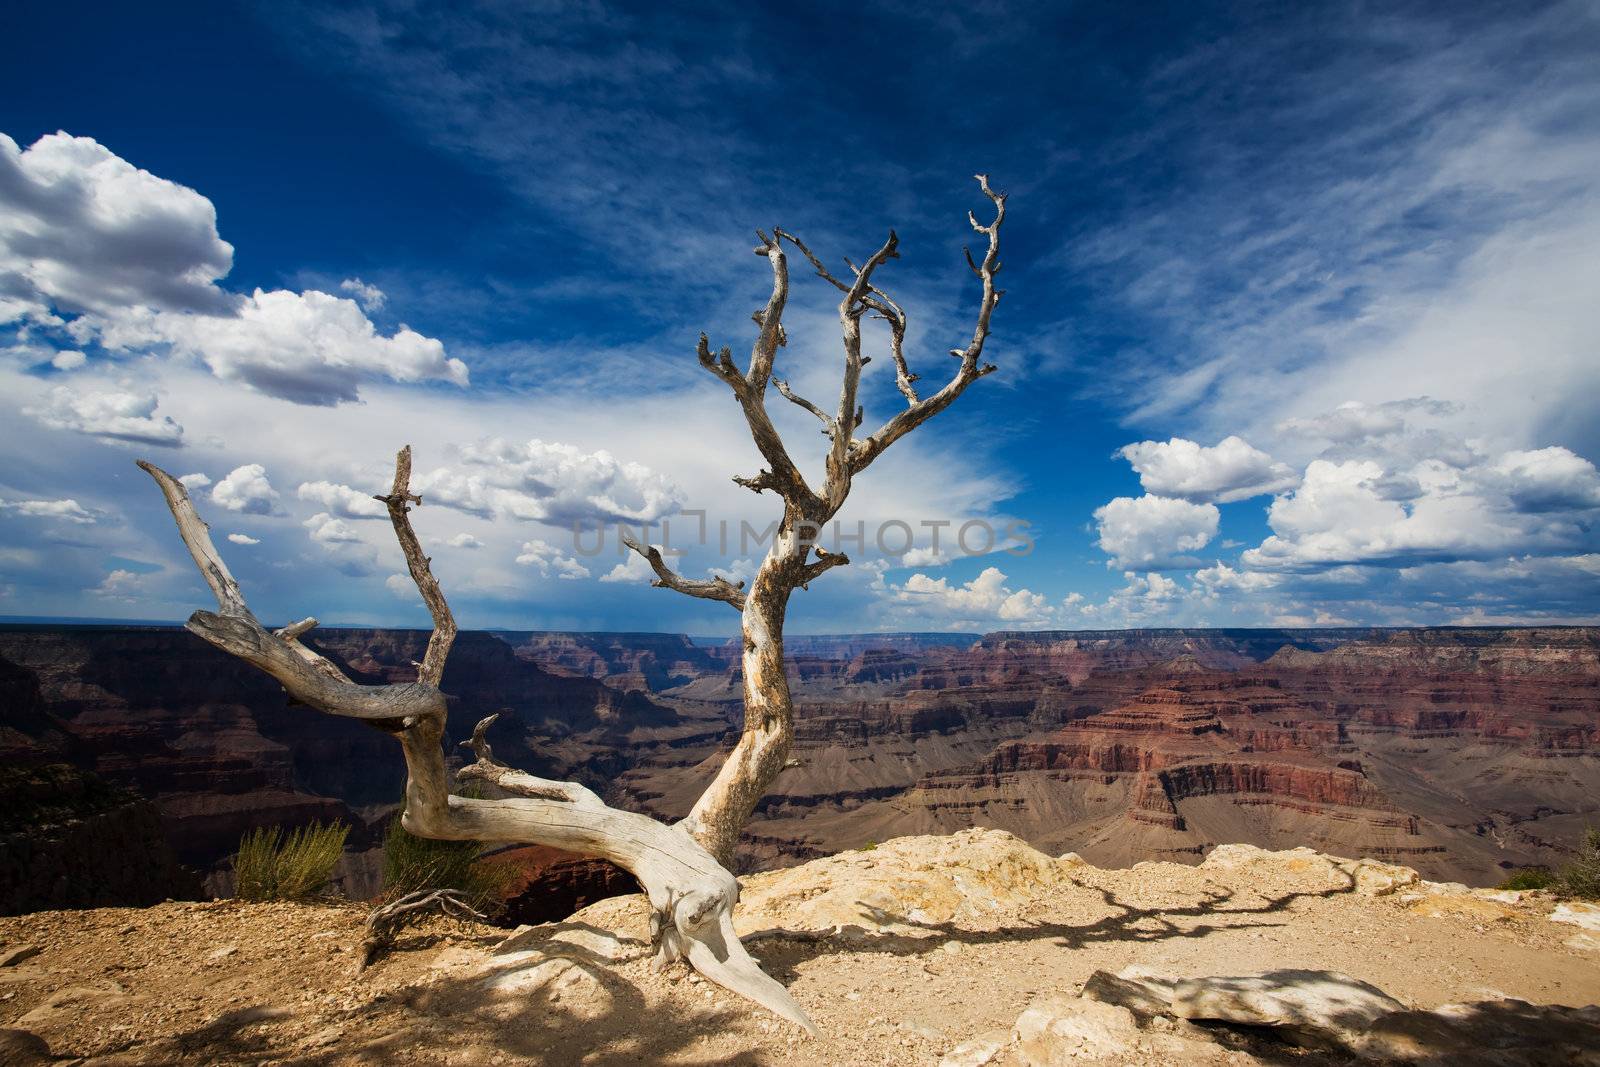 Dead Tree at Edge of the Grand Canyon